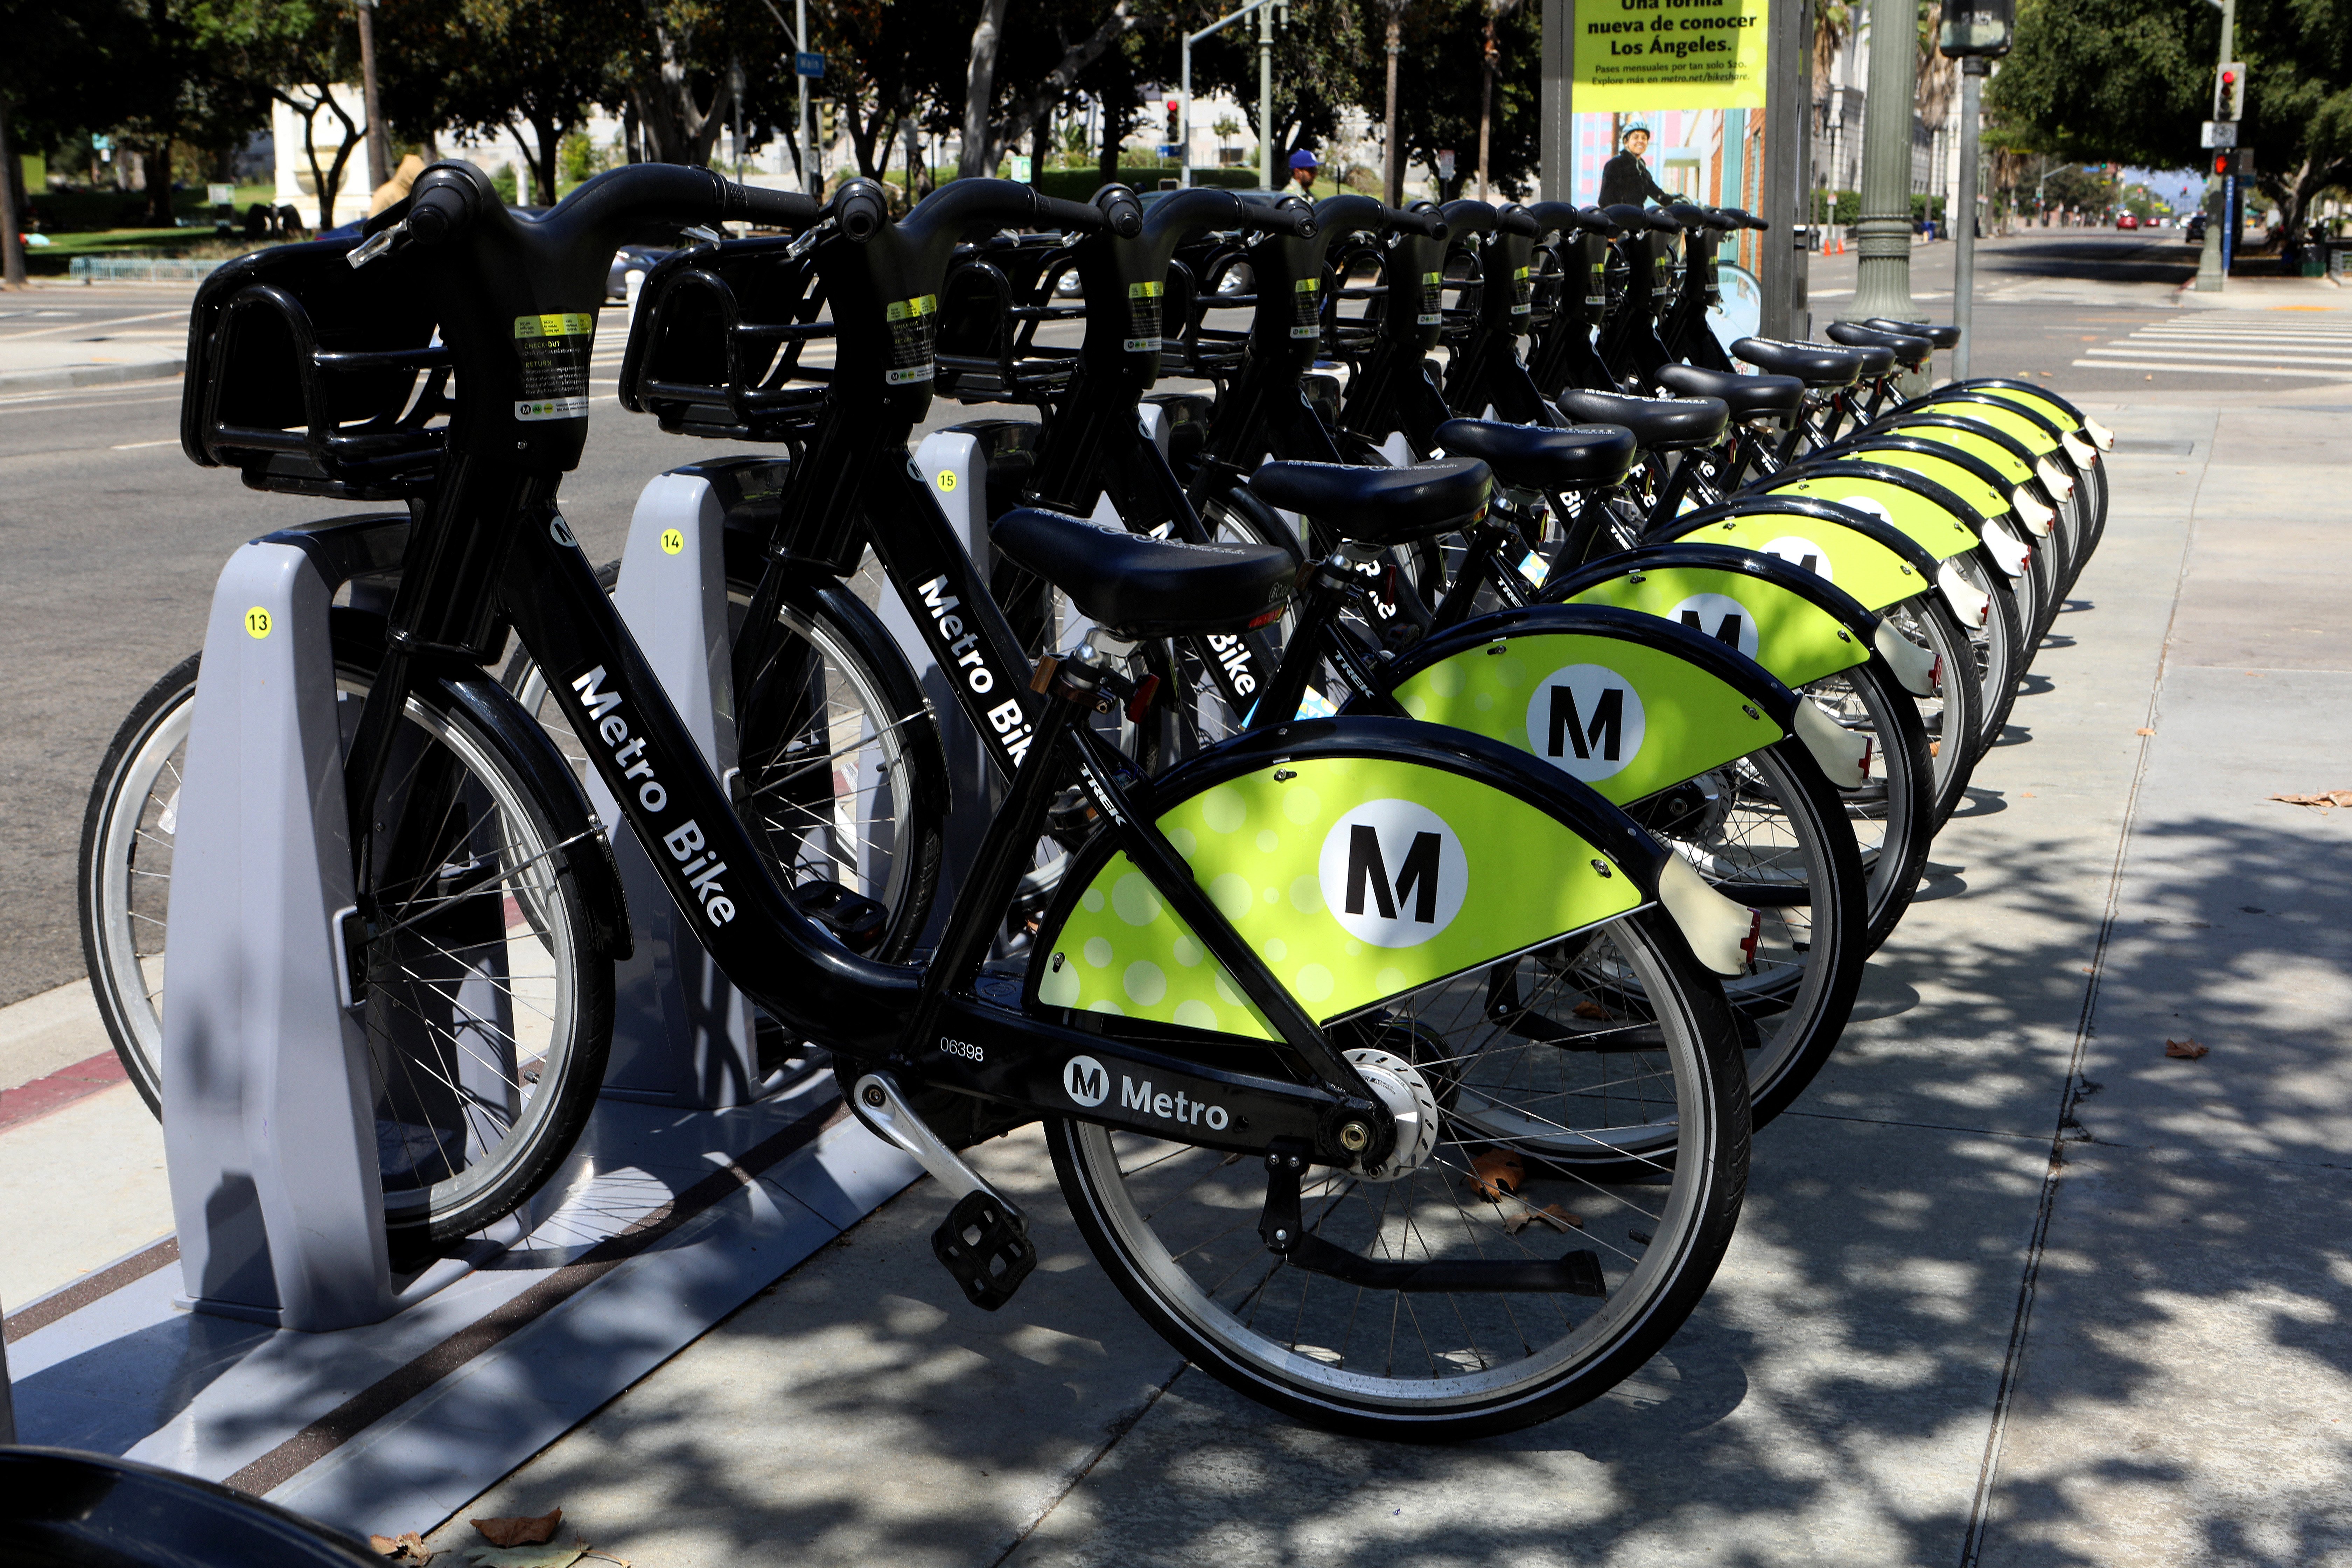 Metro To Close North Hollywood Bike Share Stations For 6 To 8 Weeks